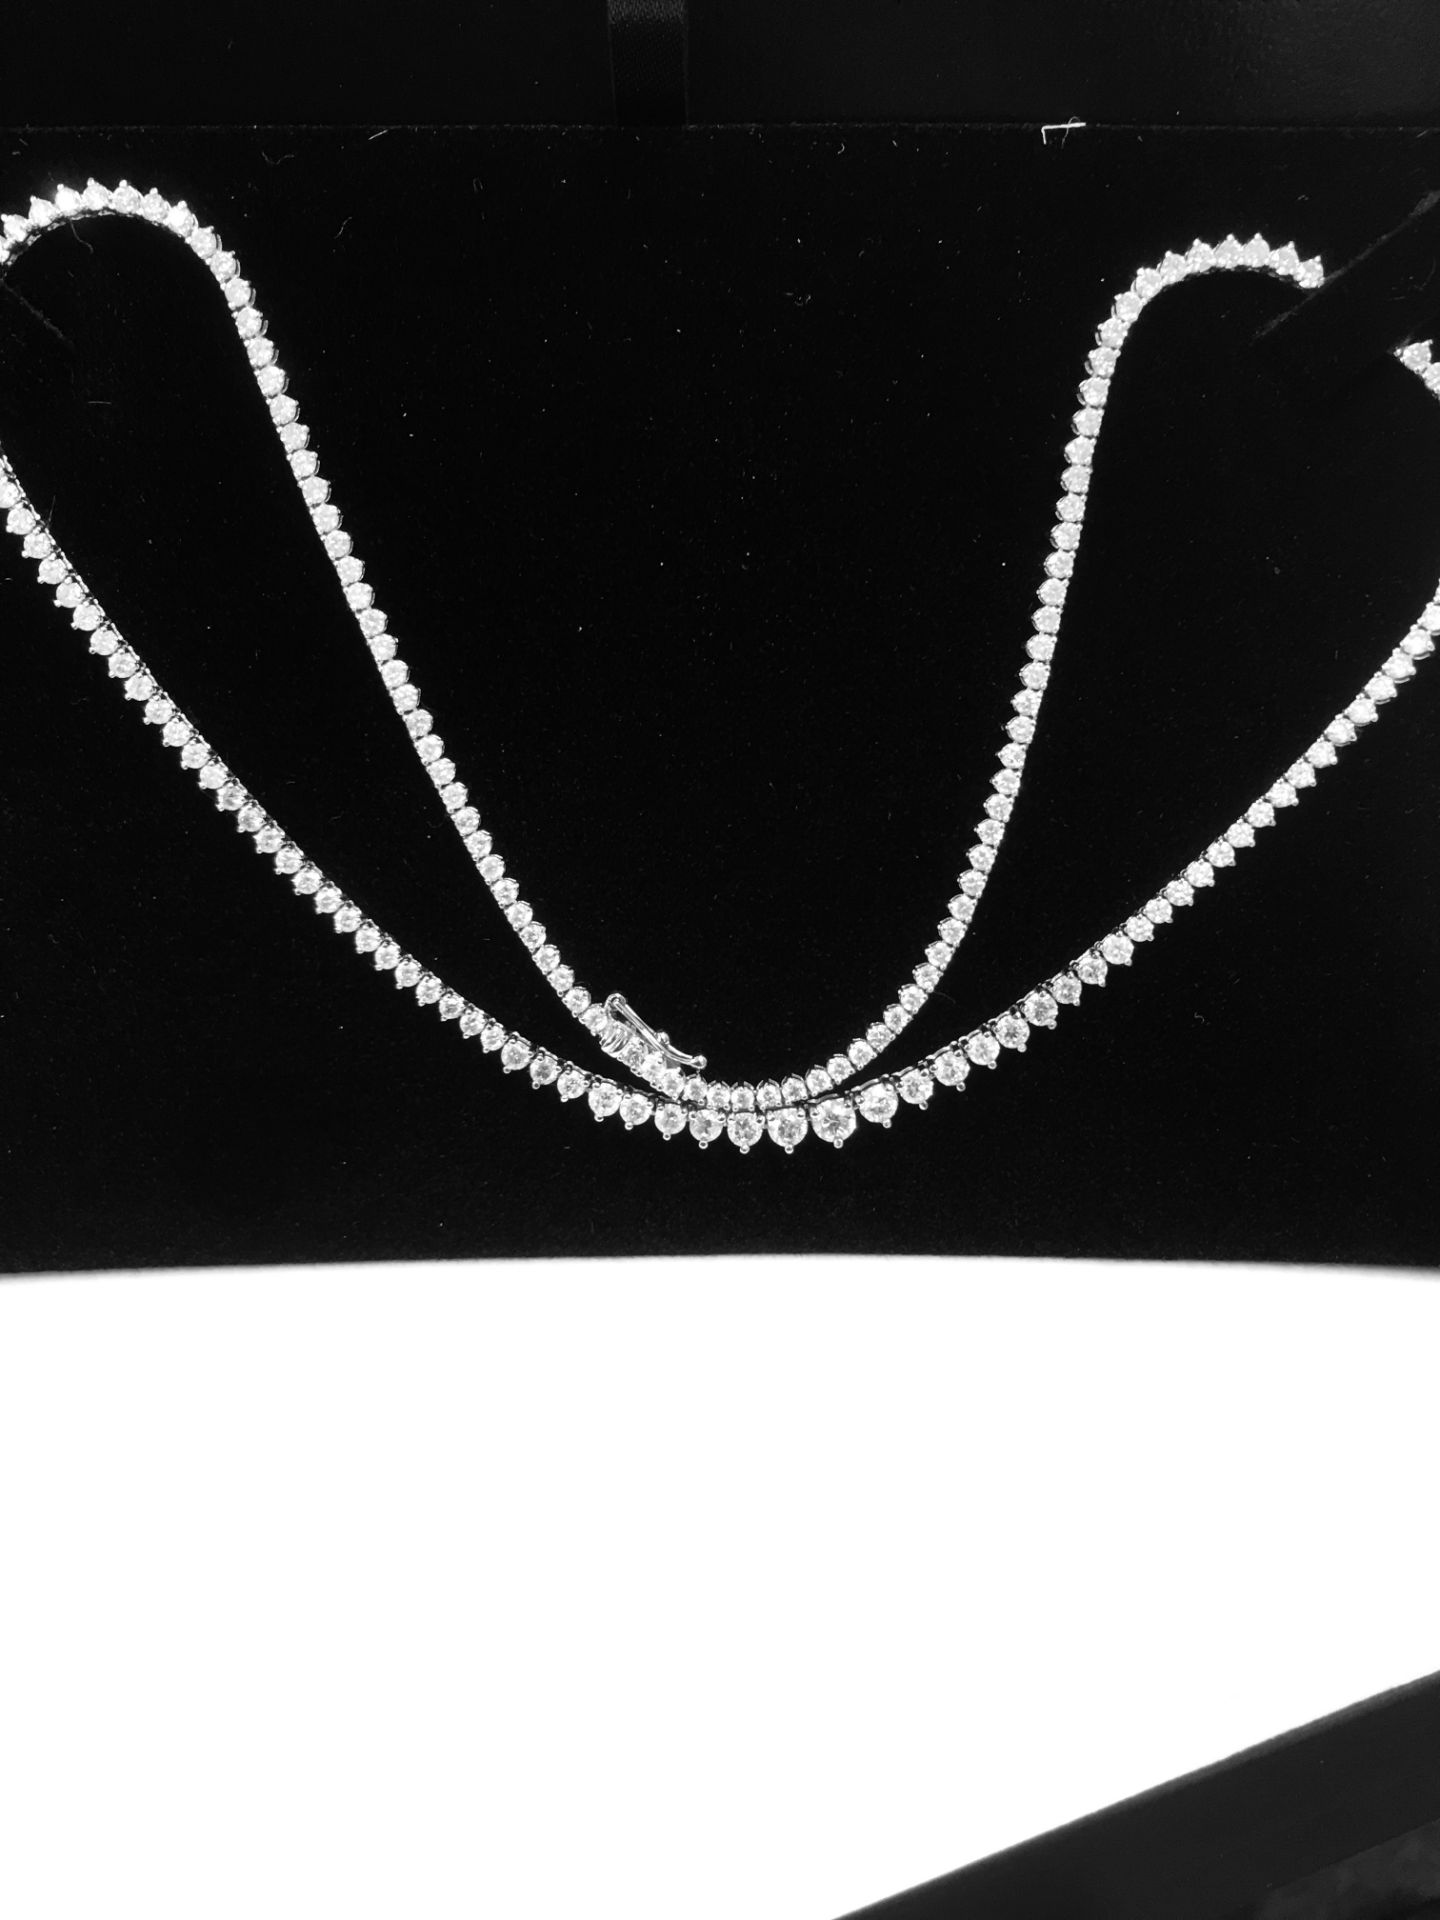 6.50ct Diamond tennis style necklace. 3 claw setting. Graduated diamonds, I colour, Si2 clarity - Image 2 of 5